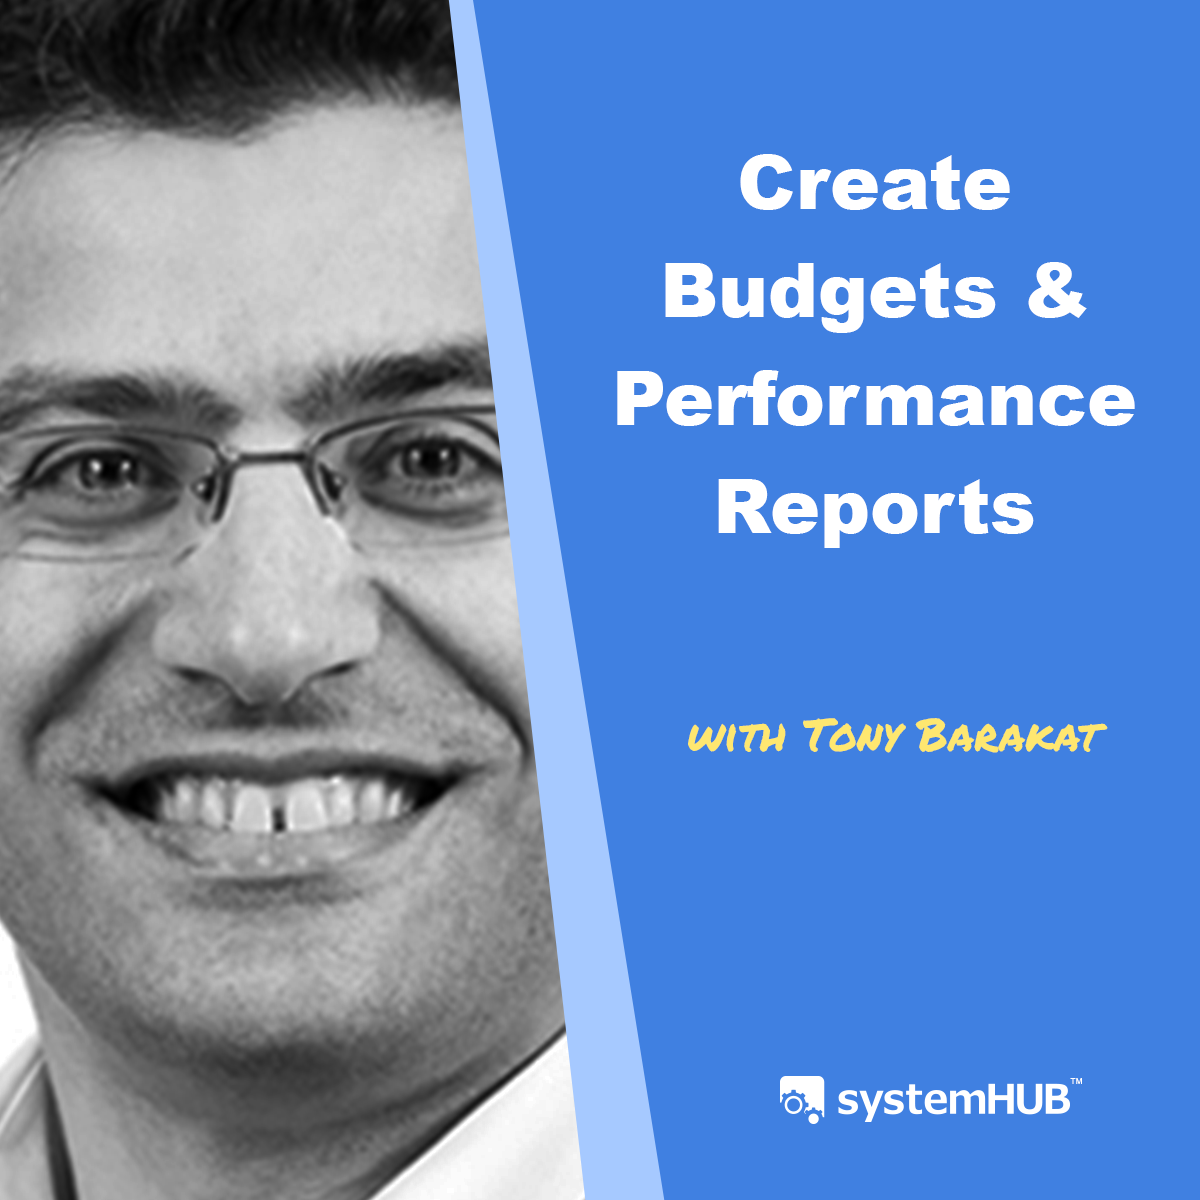 Creating Budgets, Reports, and Business Performance with Tony Barakat